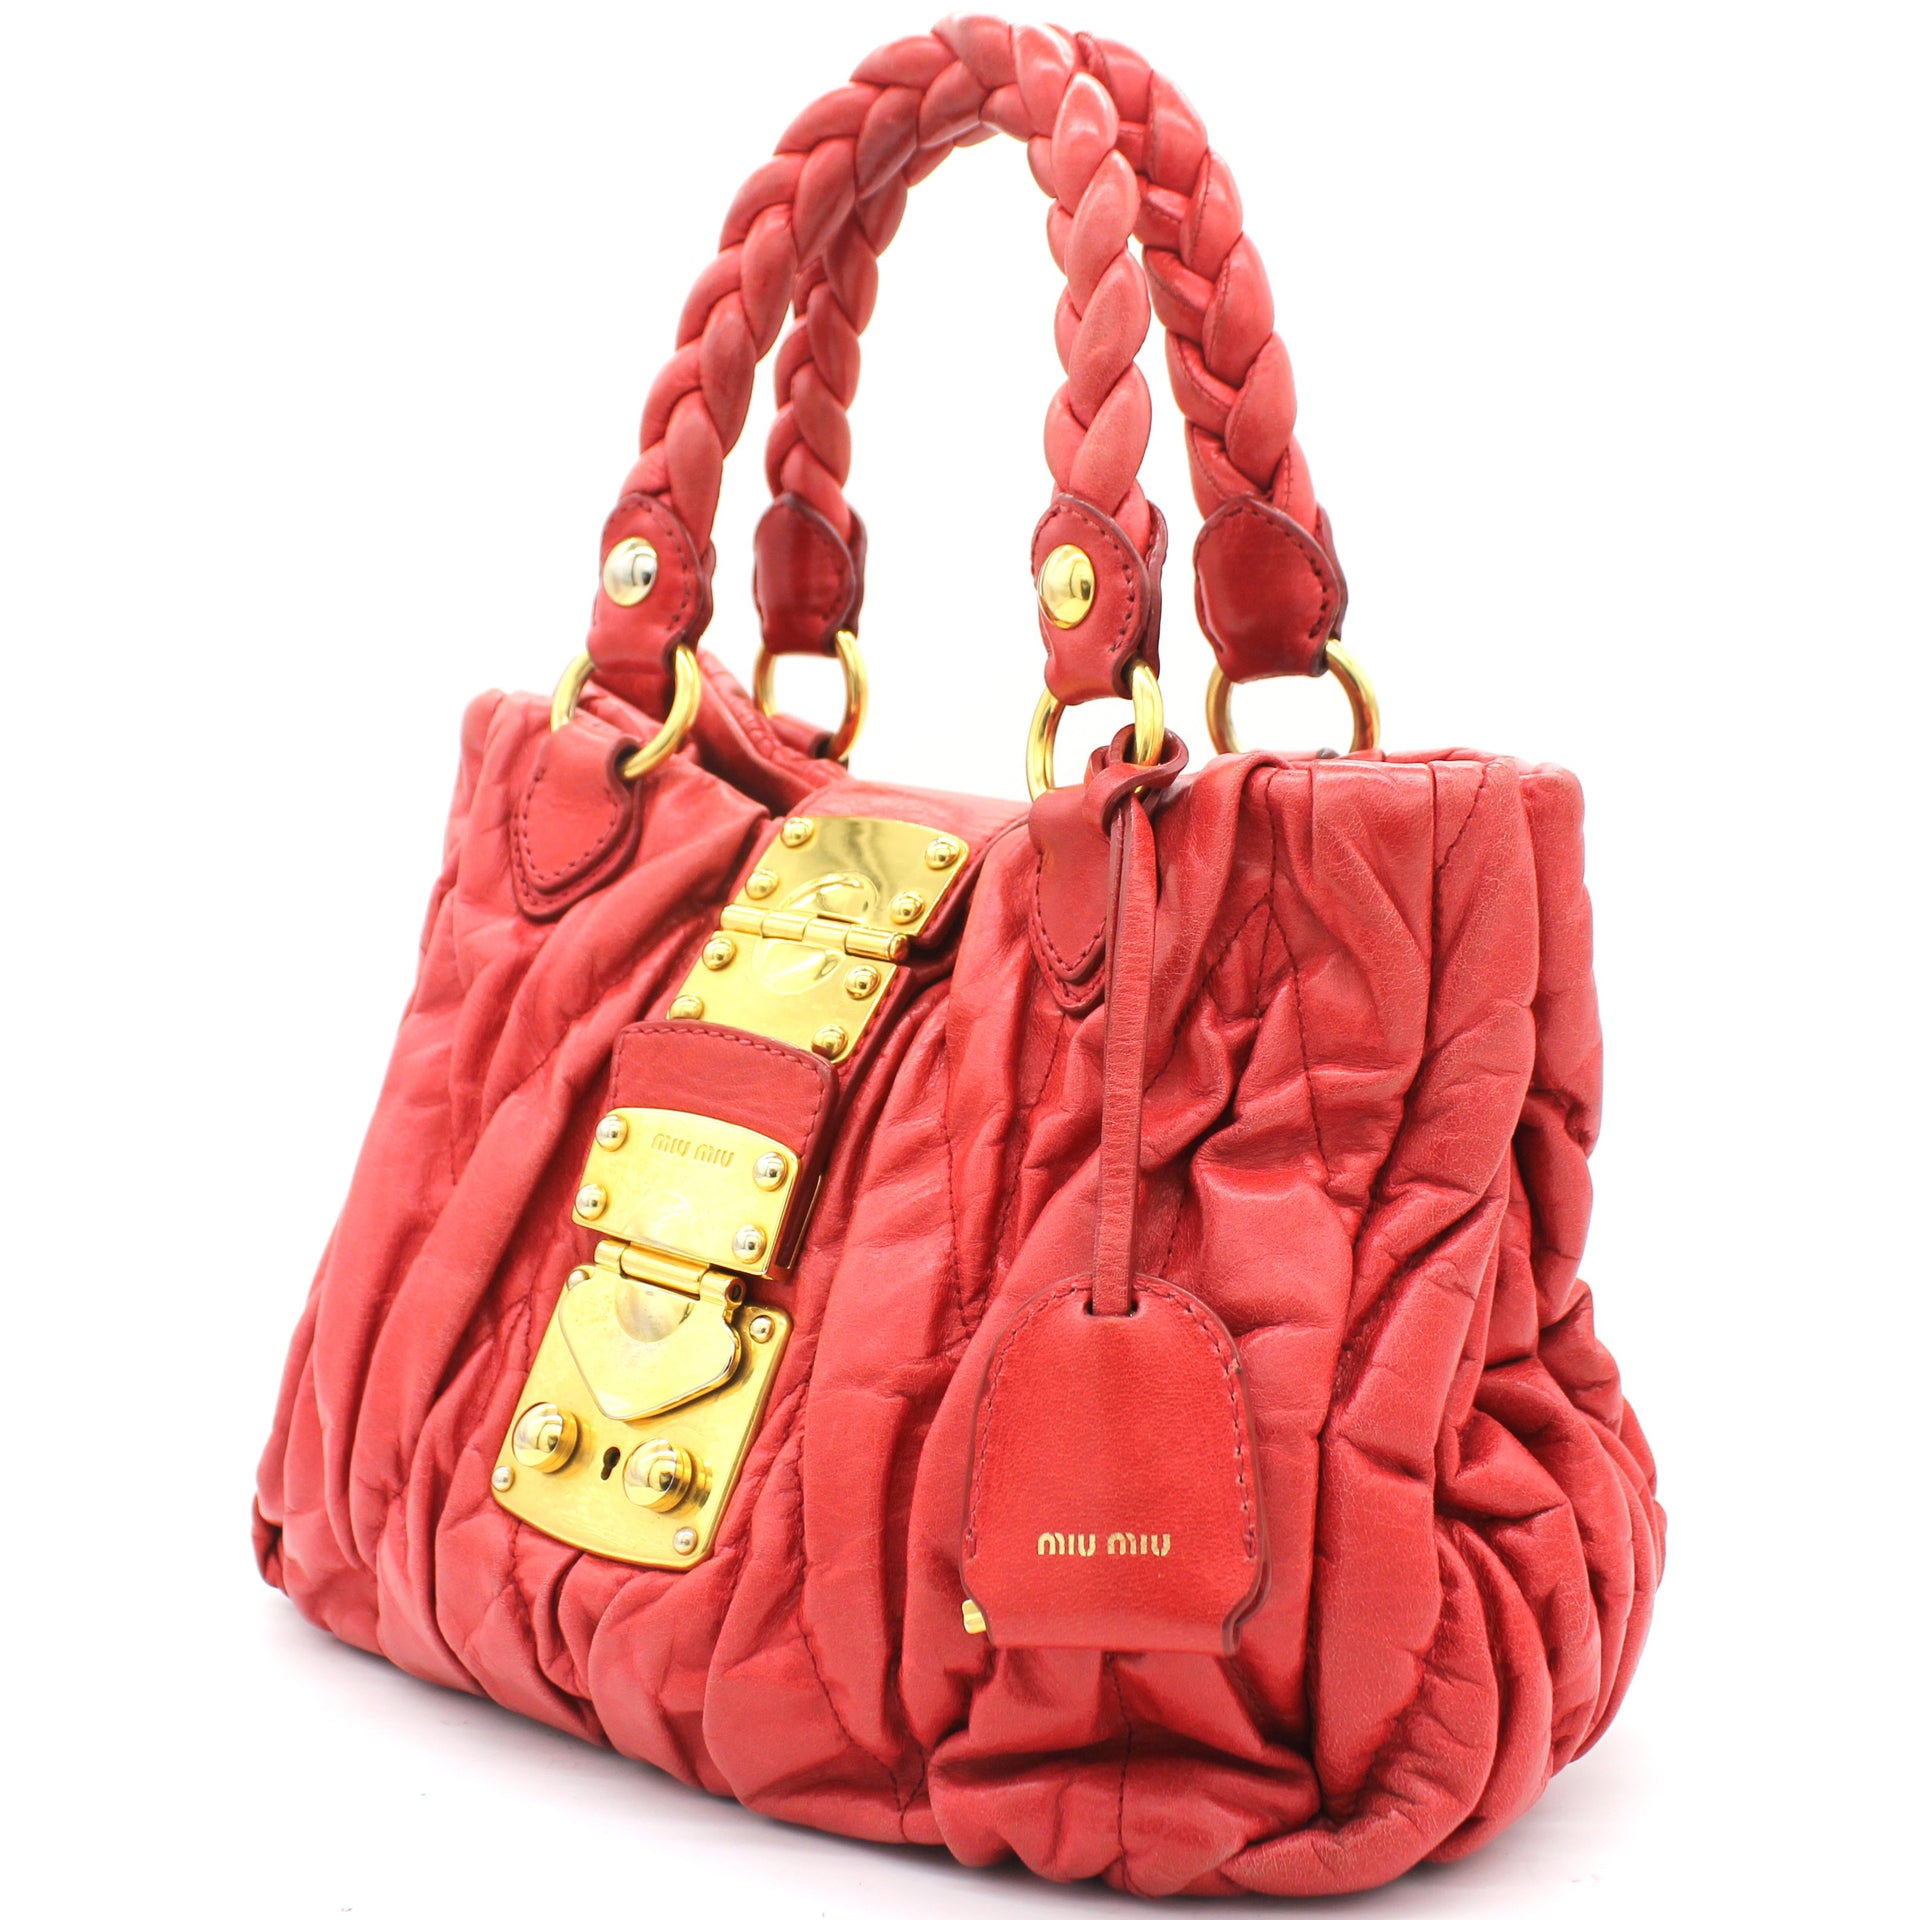 Matelasse Leather Red Tote